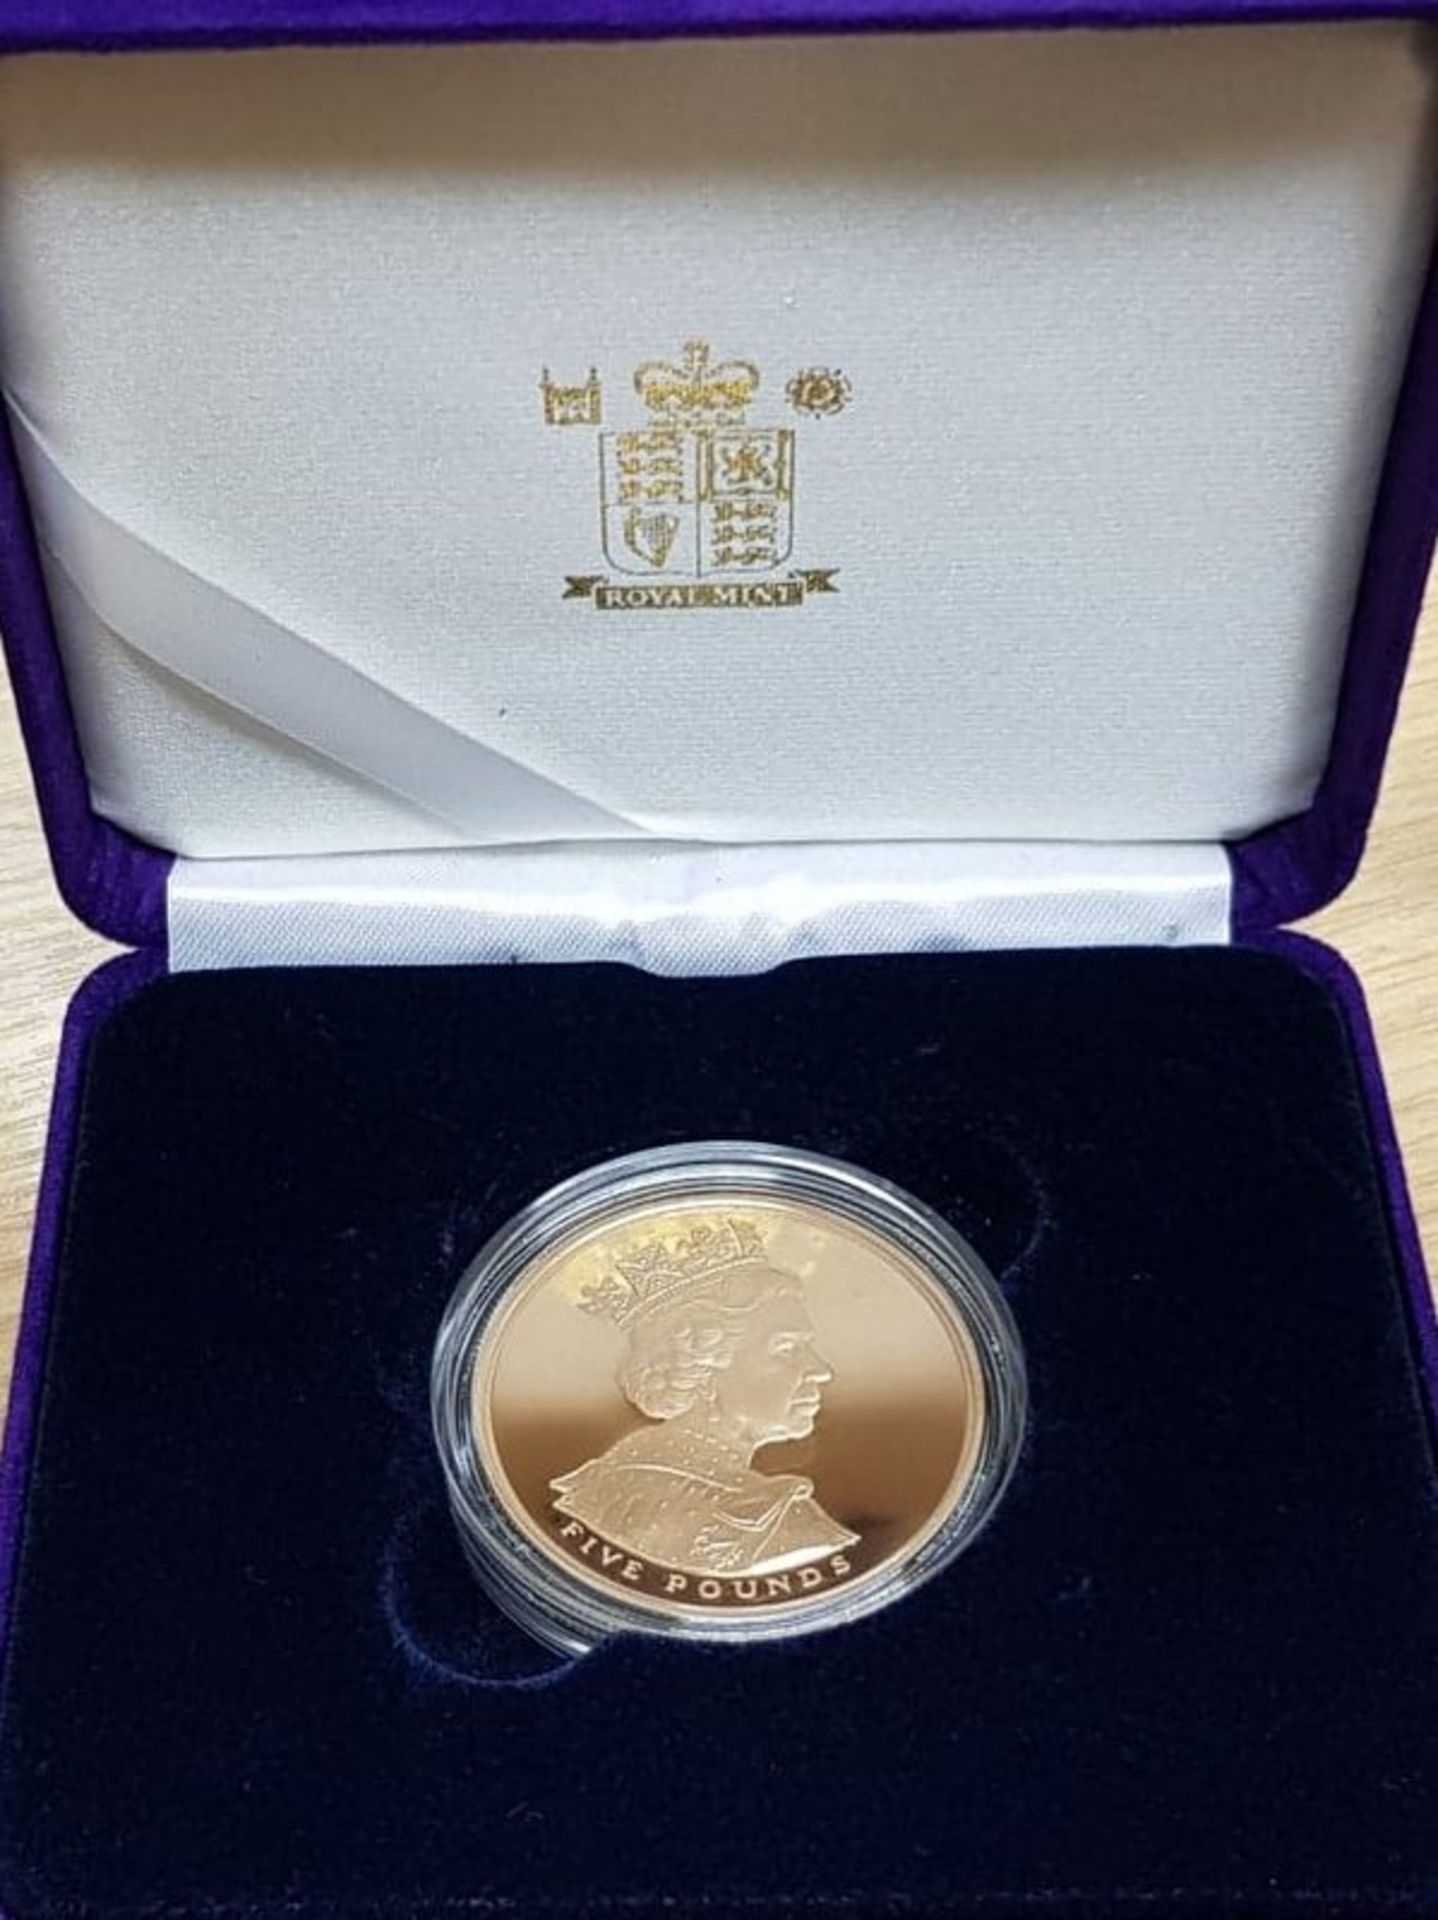 2002 - Gold Five Pound Proof Coin, Golden Jubilee Boxed - Image 4 of 6